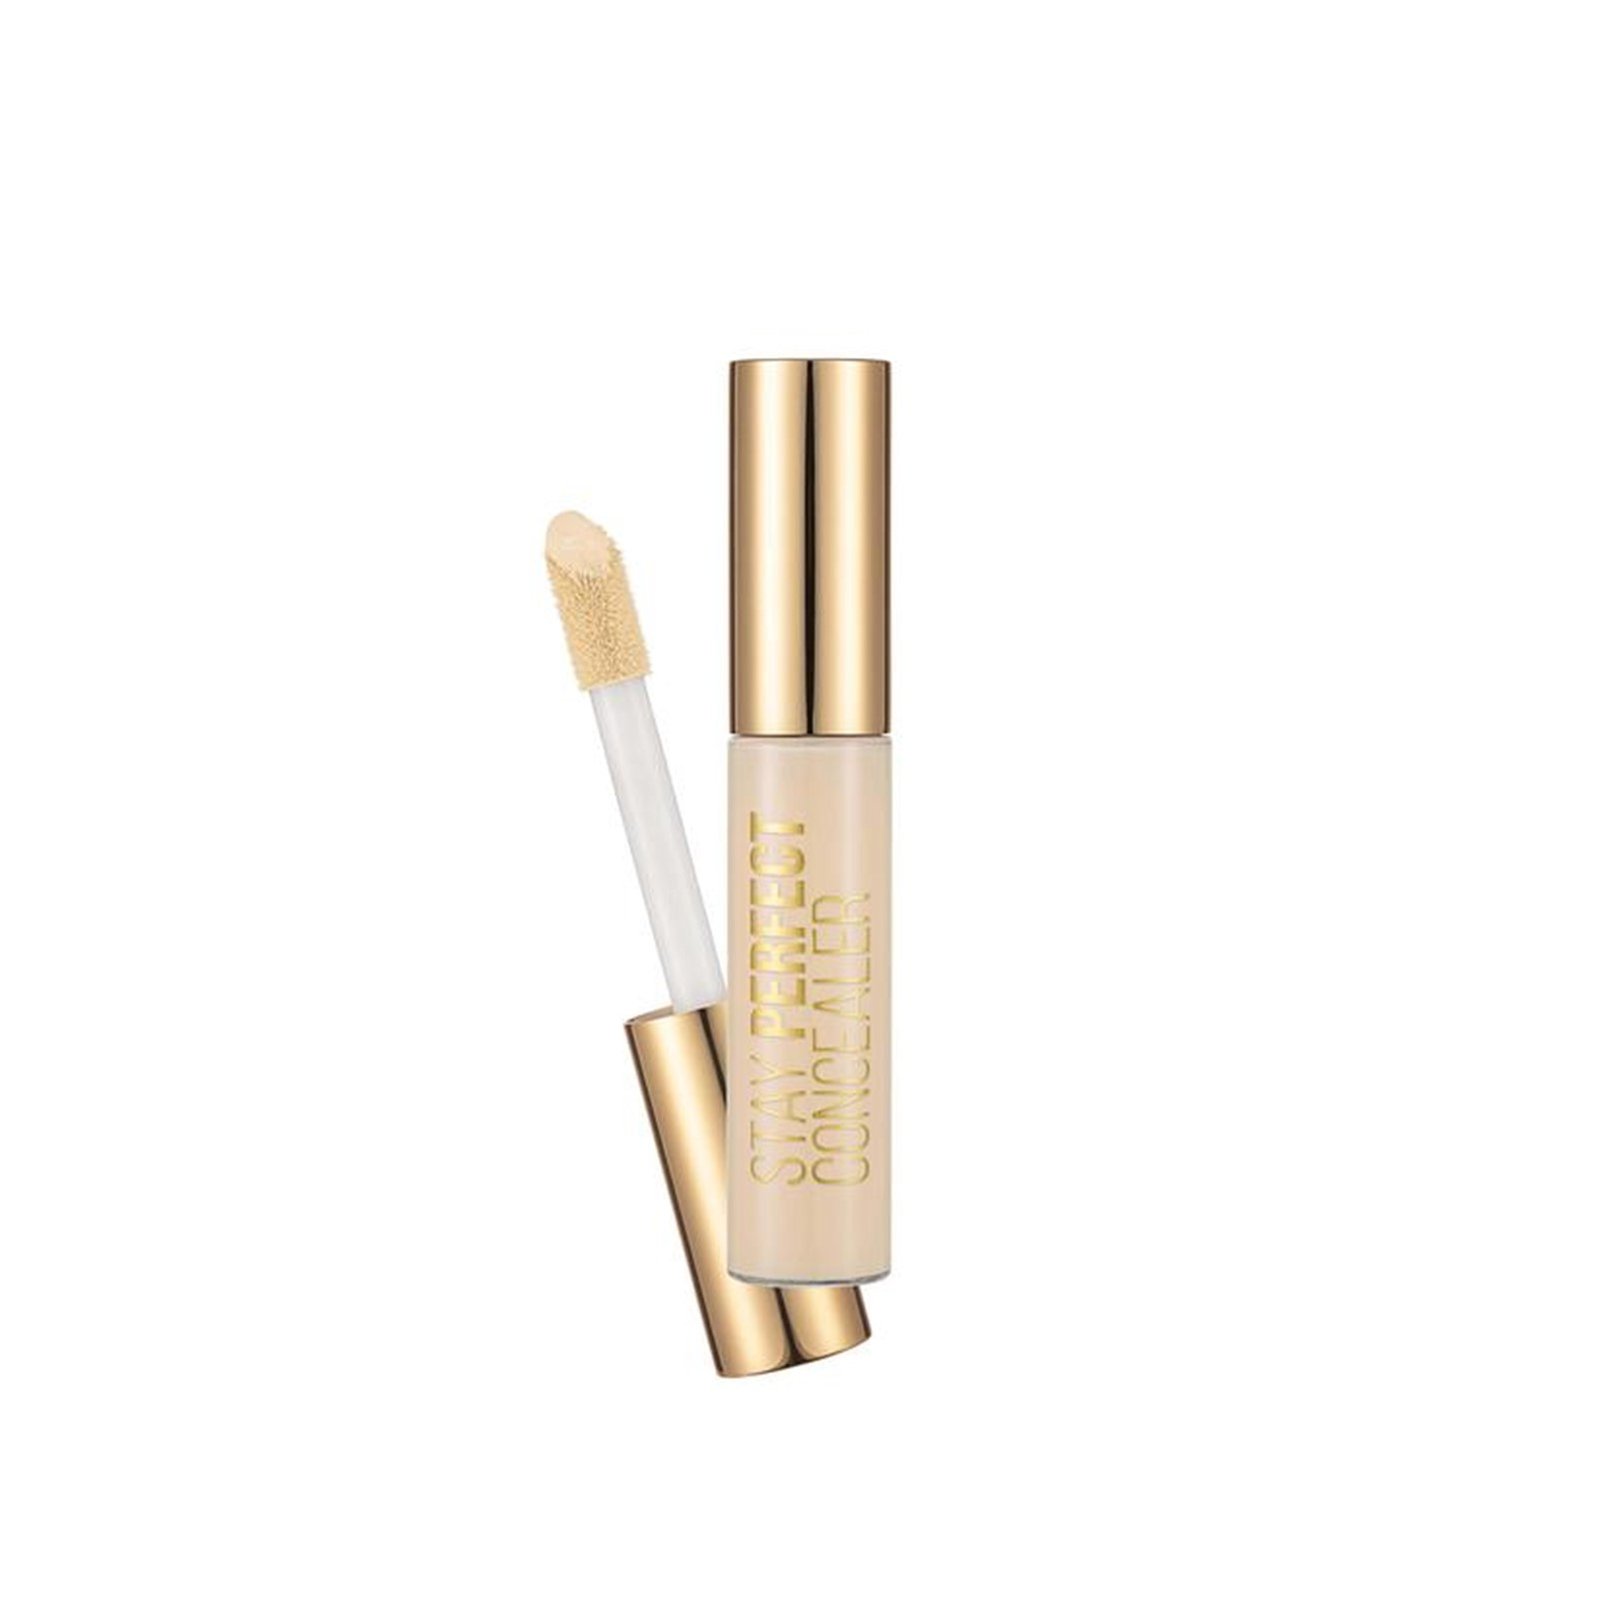 Flormar Malta - Perfect Coverage - the perfect cover up